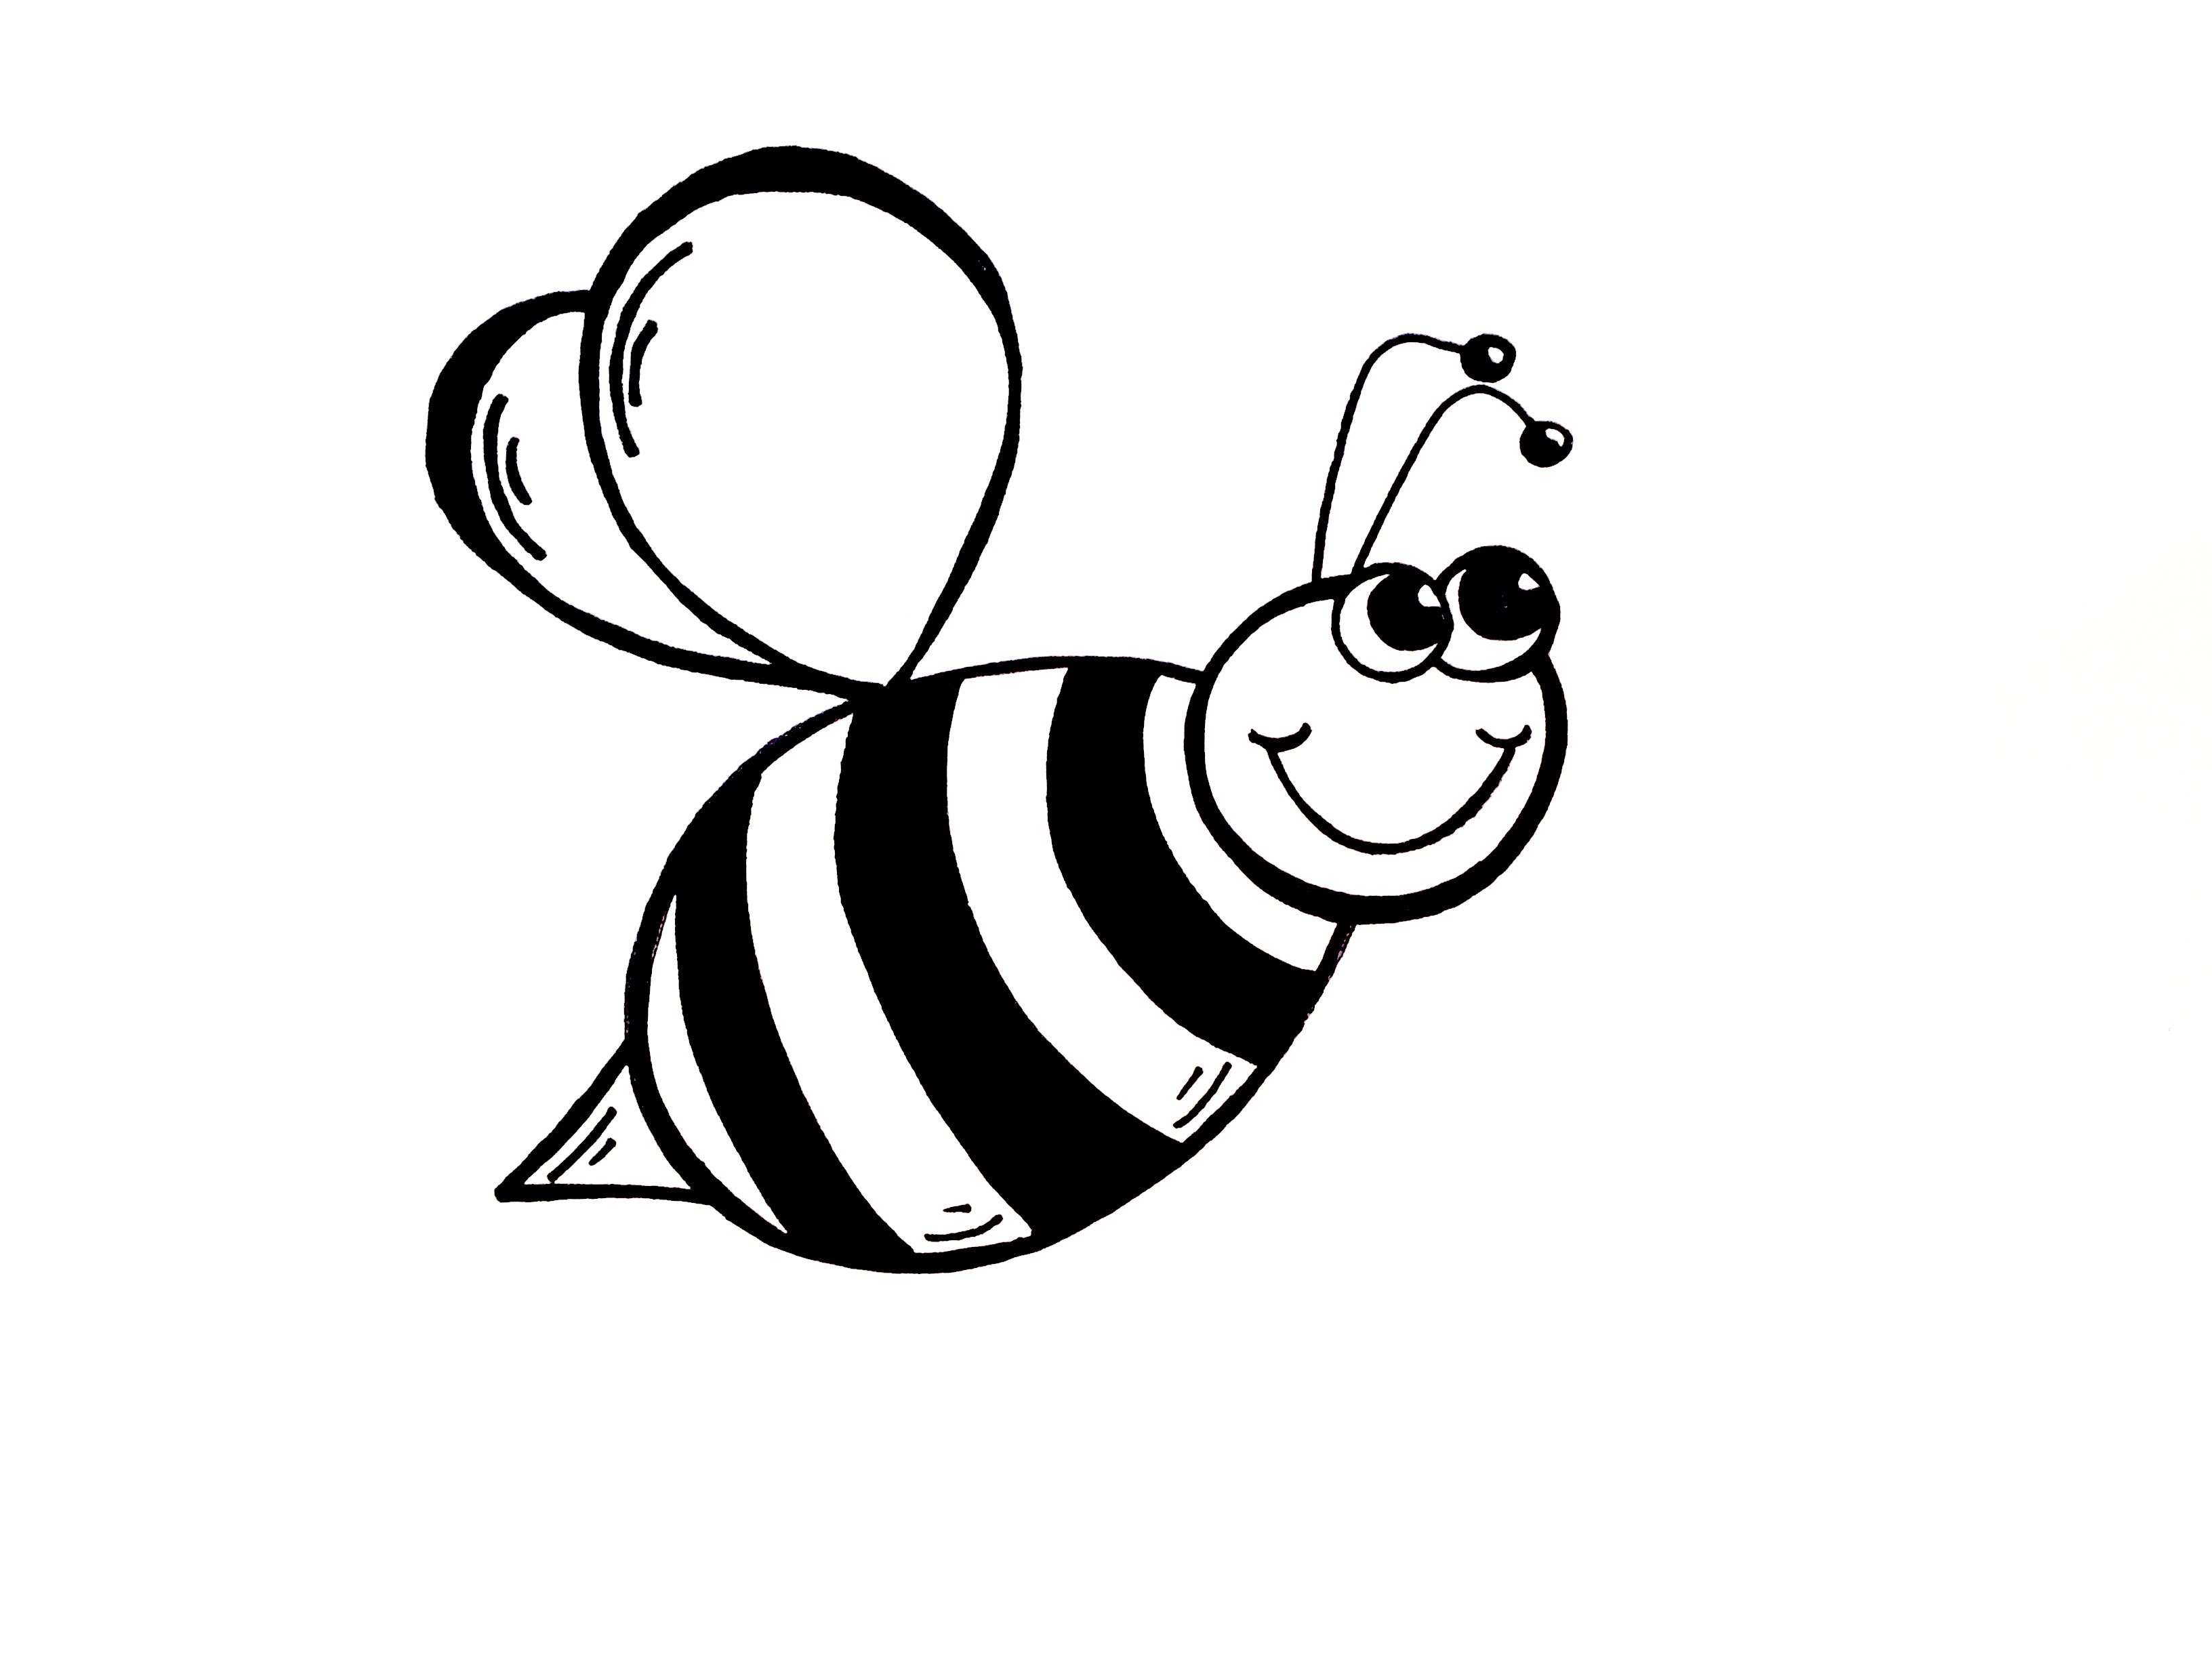 beehive clipart outline